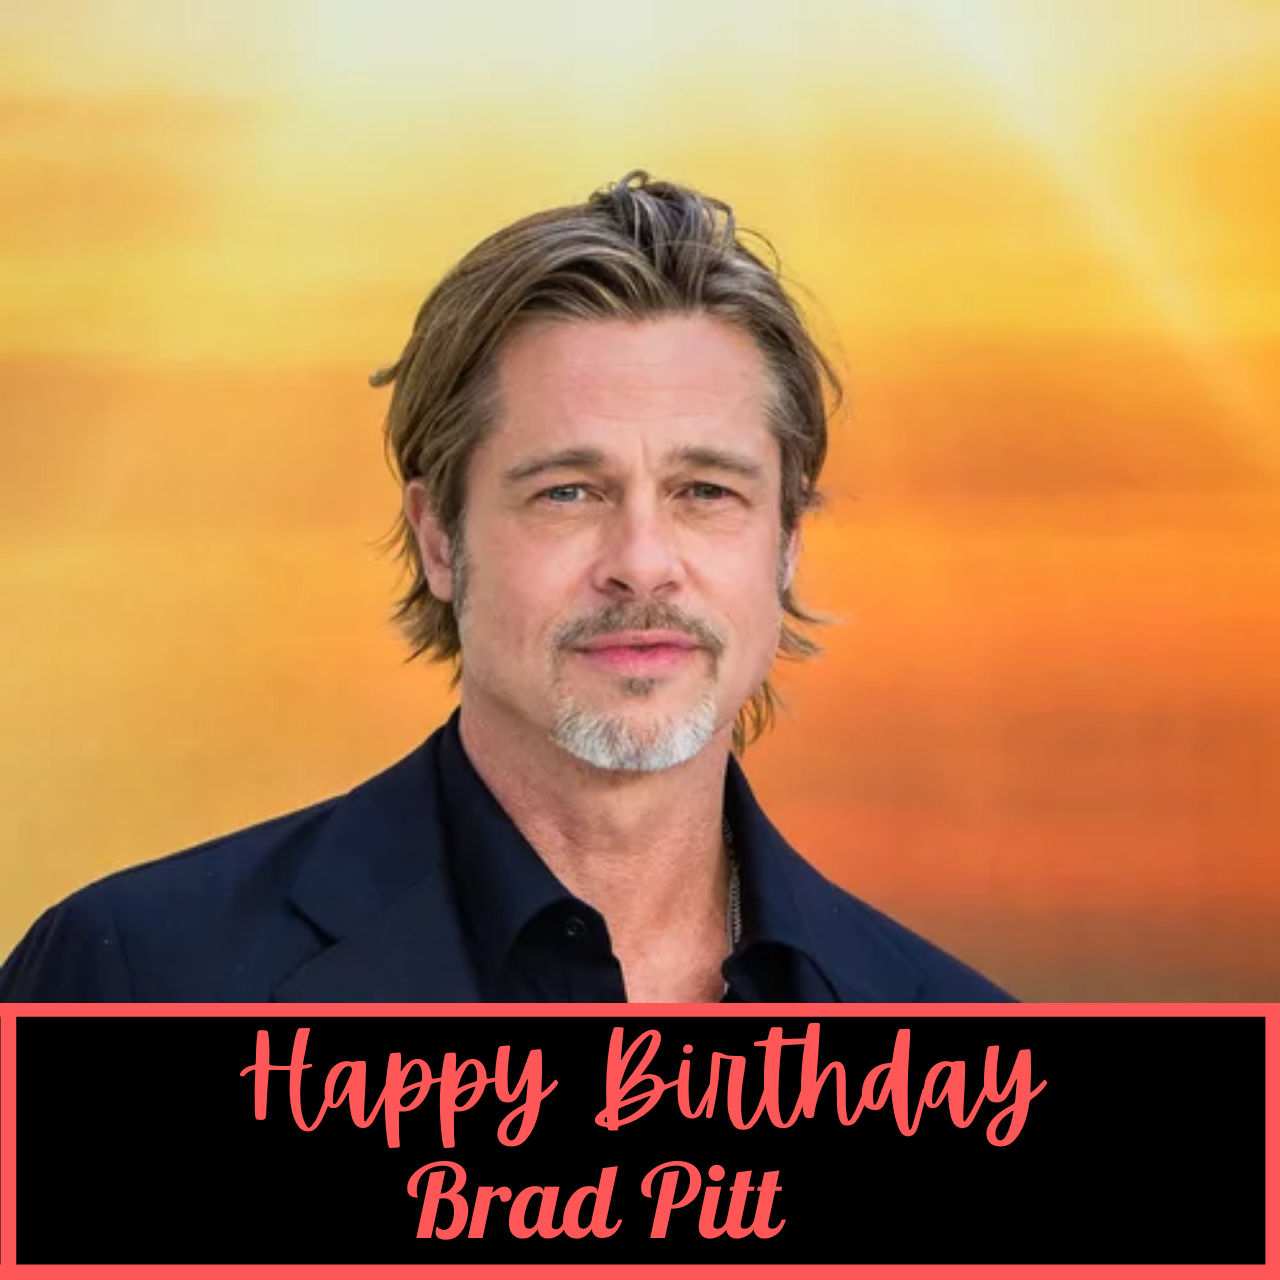 Happy Birthday Brad Pitt Wishes, Quotes, Images, Meme and Gifs to greet famous American actor